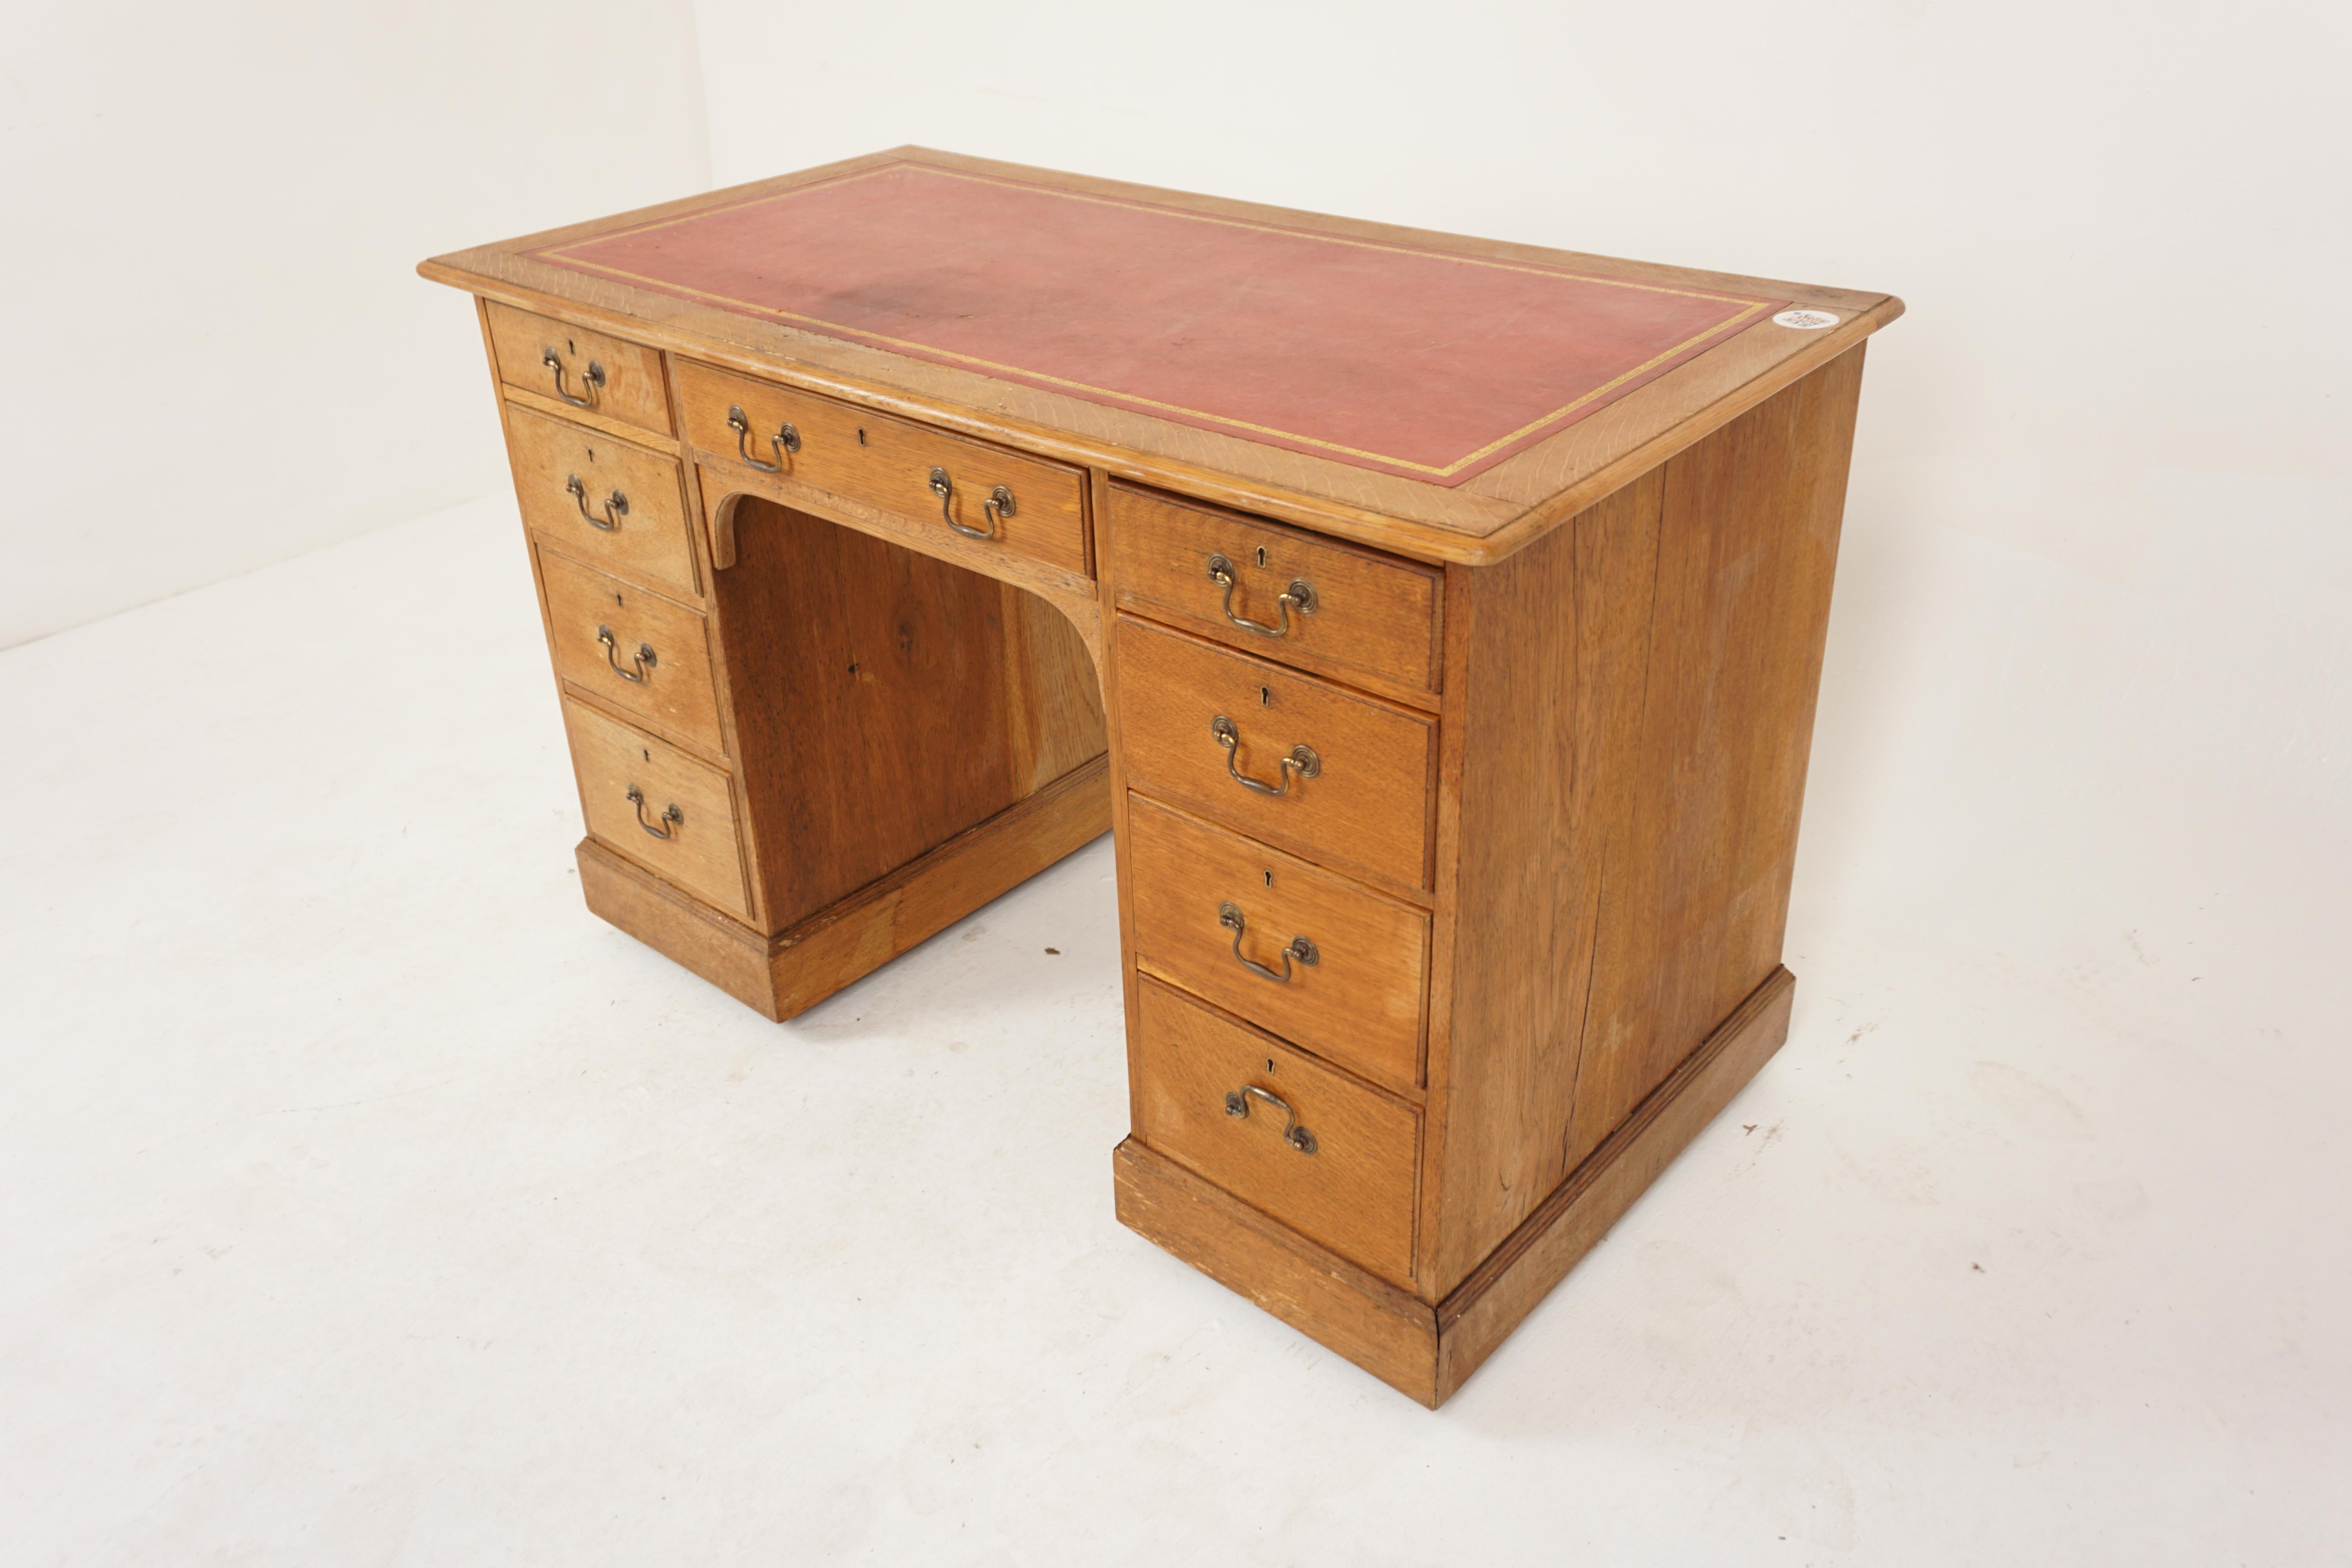 Antique, Victorian, golden oak, pedestal desk, writing table, Scotland 1890, H057

Scotland 1890
Solid Oak
Original Finish
Rectangular moulded top with a burgundy, monogrammed leather inset with the gold tooling (AW)
Has an arrangement of nine